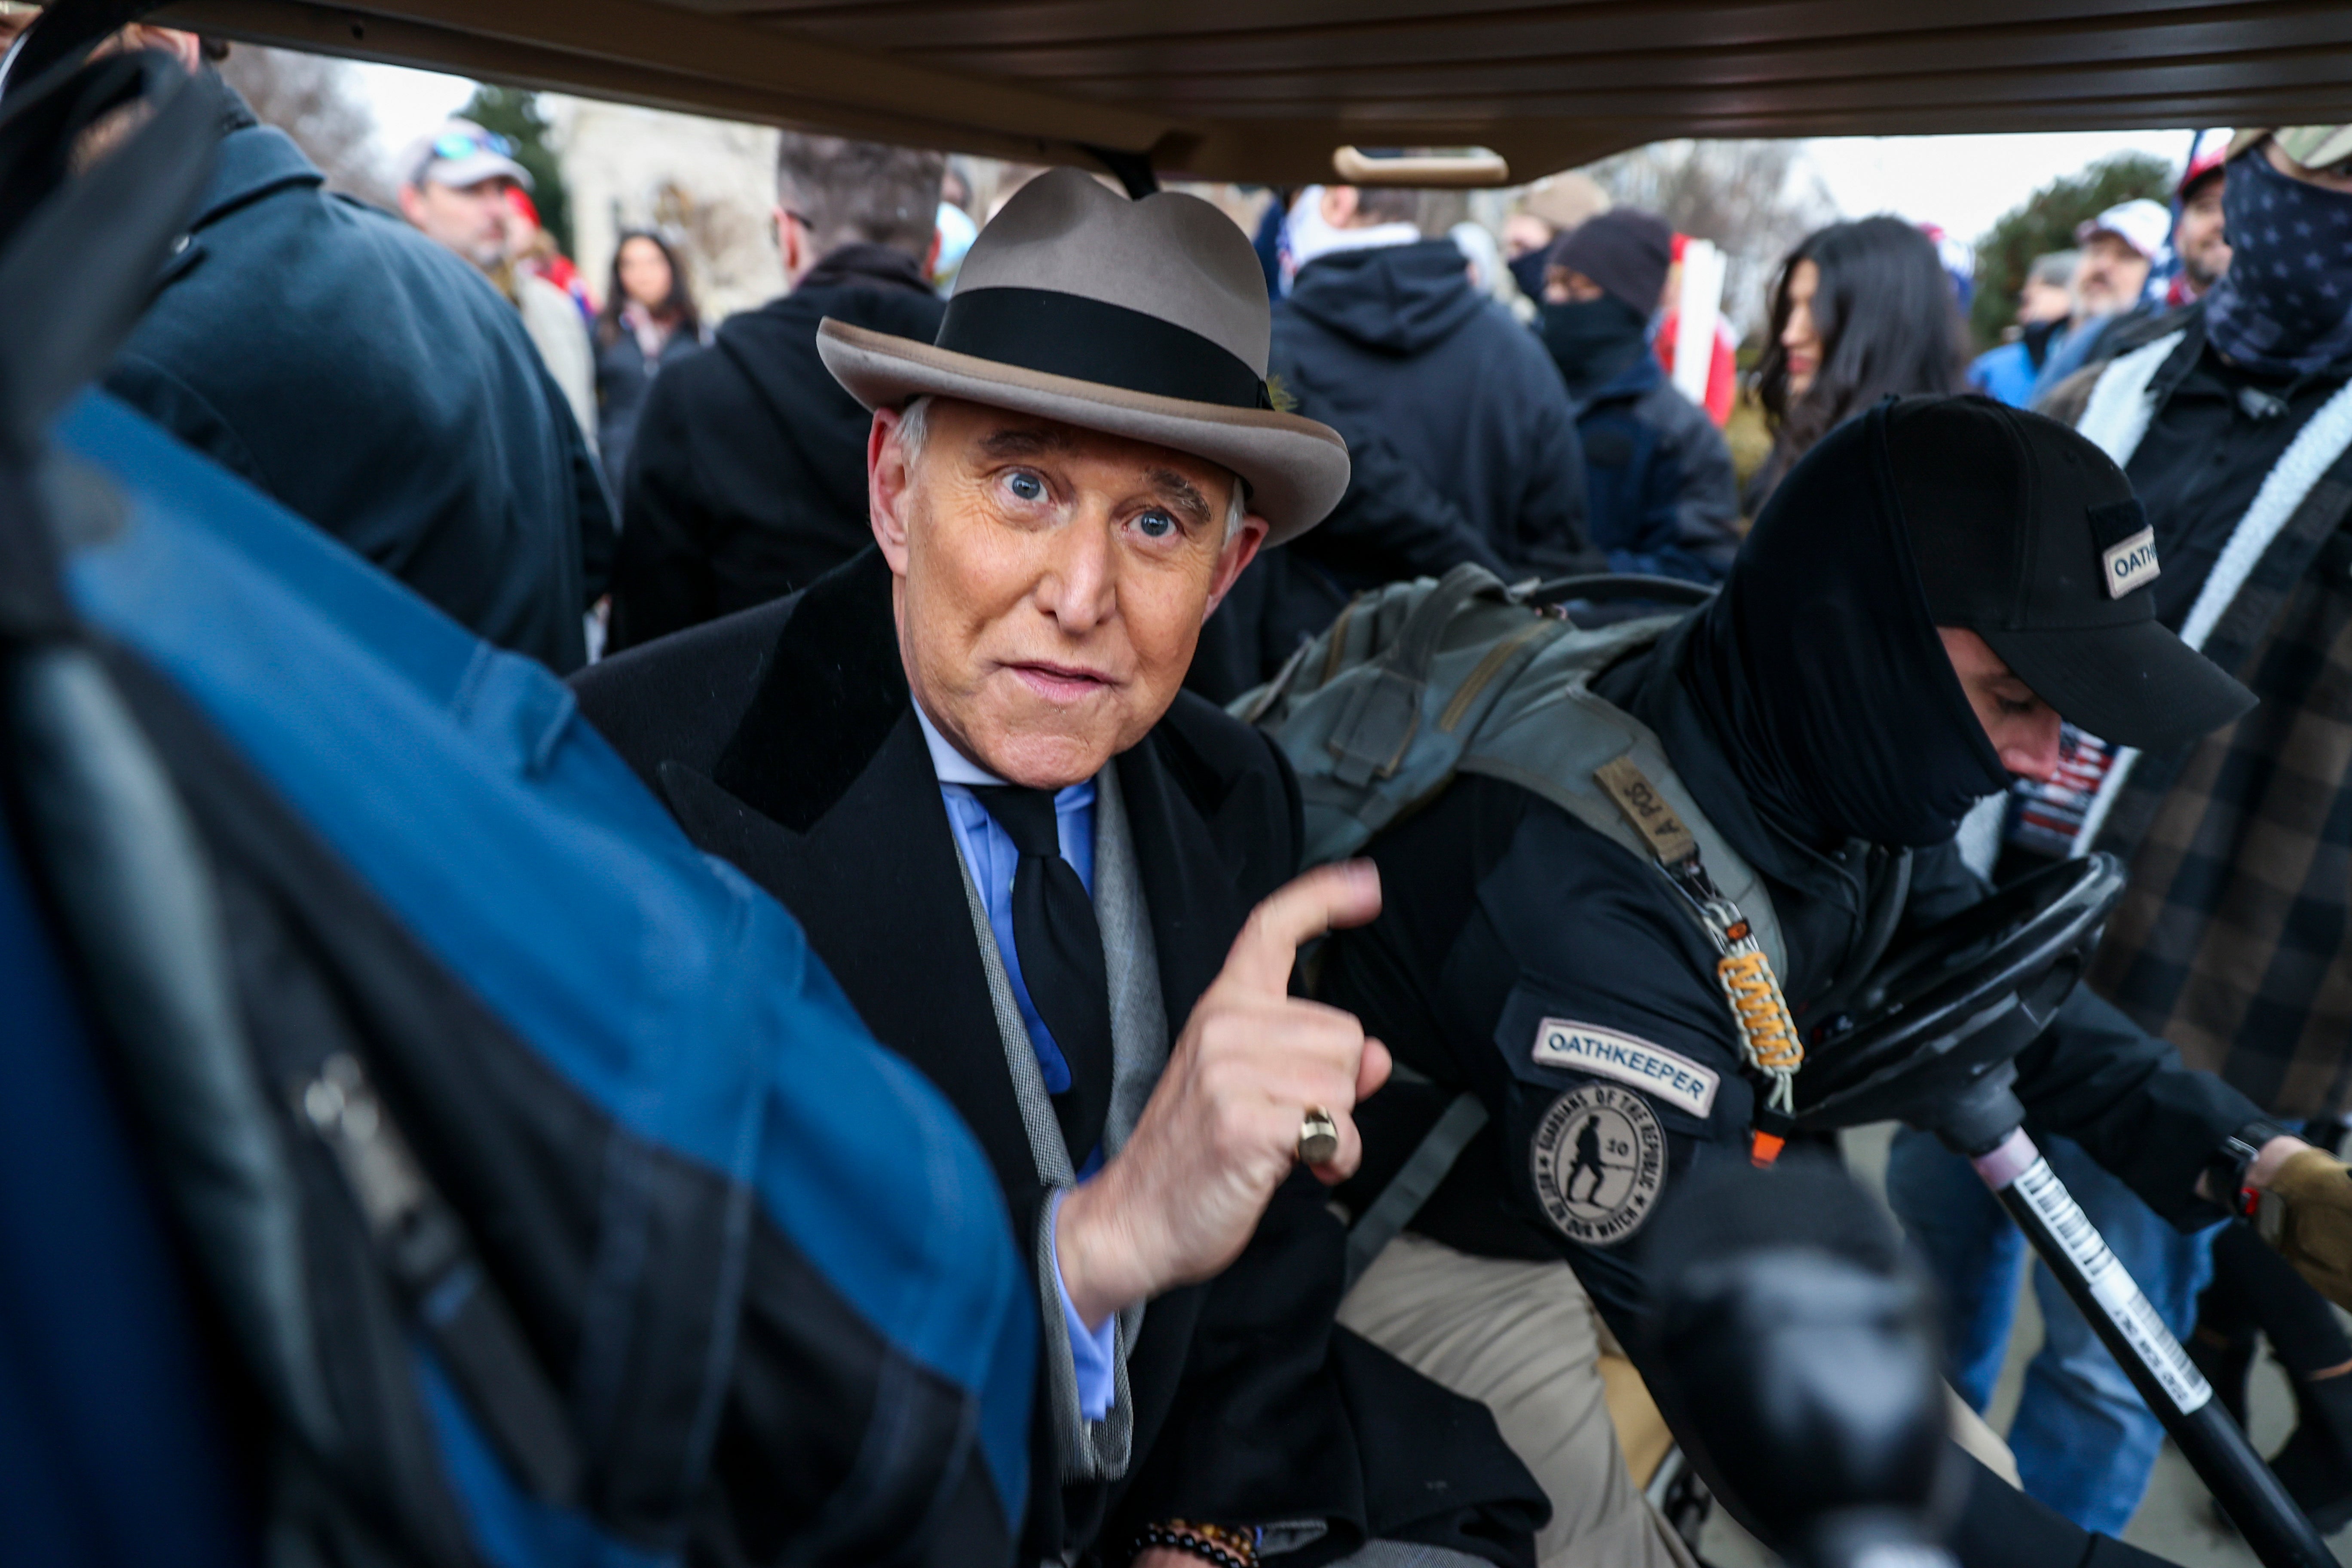 File Image: Roger Stone, former adviser to president Donald Trump greets supporters after speaking in front of the Supreme Court on 5 January in Washington, DC